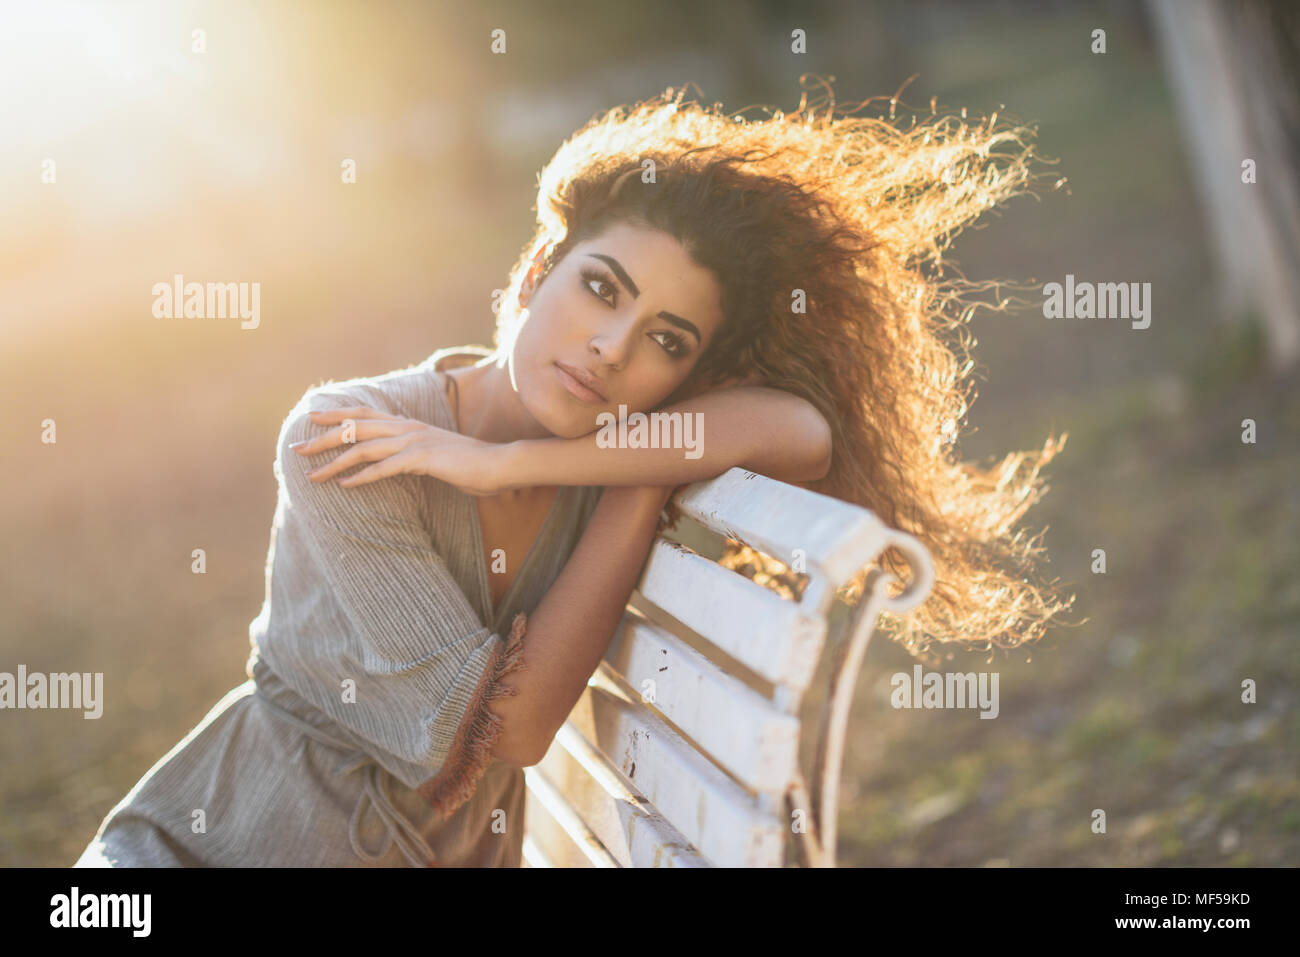 Spain, Andalusia, Granada. Beautiful young woman with curly hairstyle sitting on a bench in an urban park. Lifestyle concept. Stock Photo